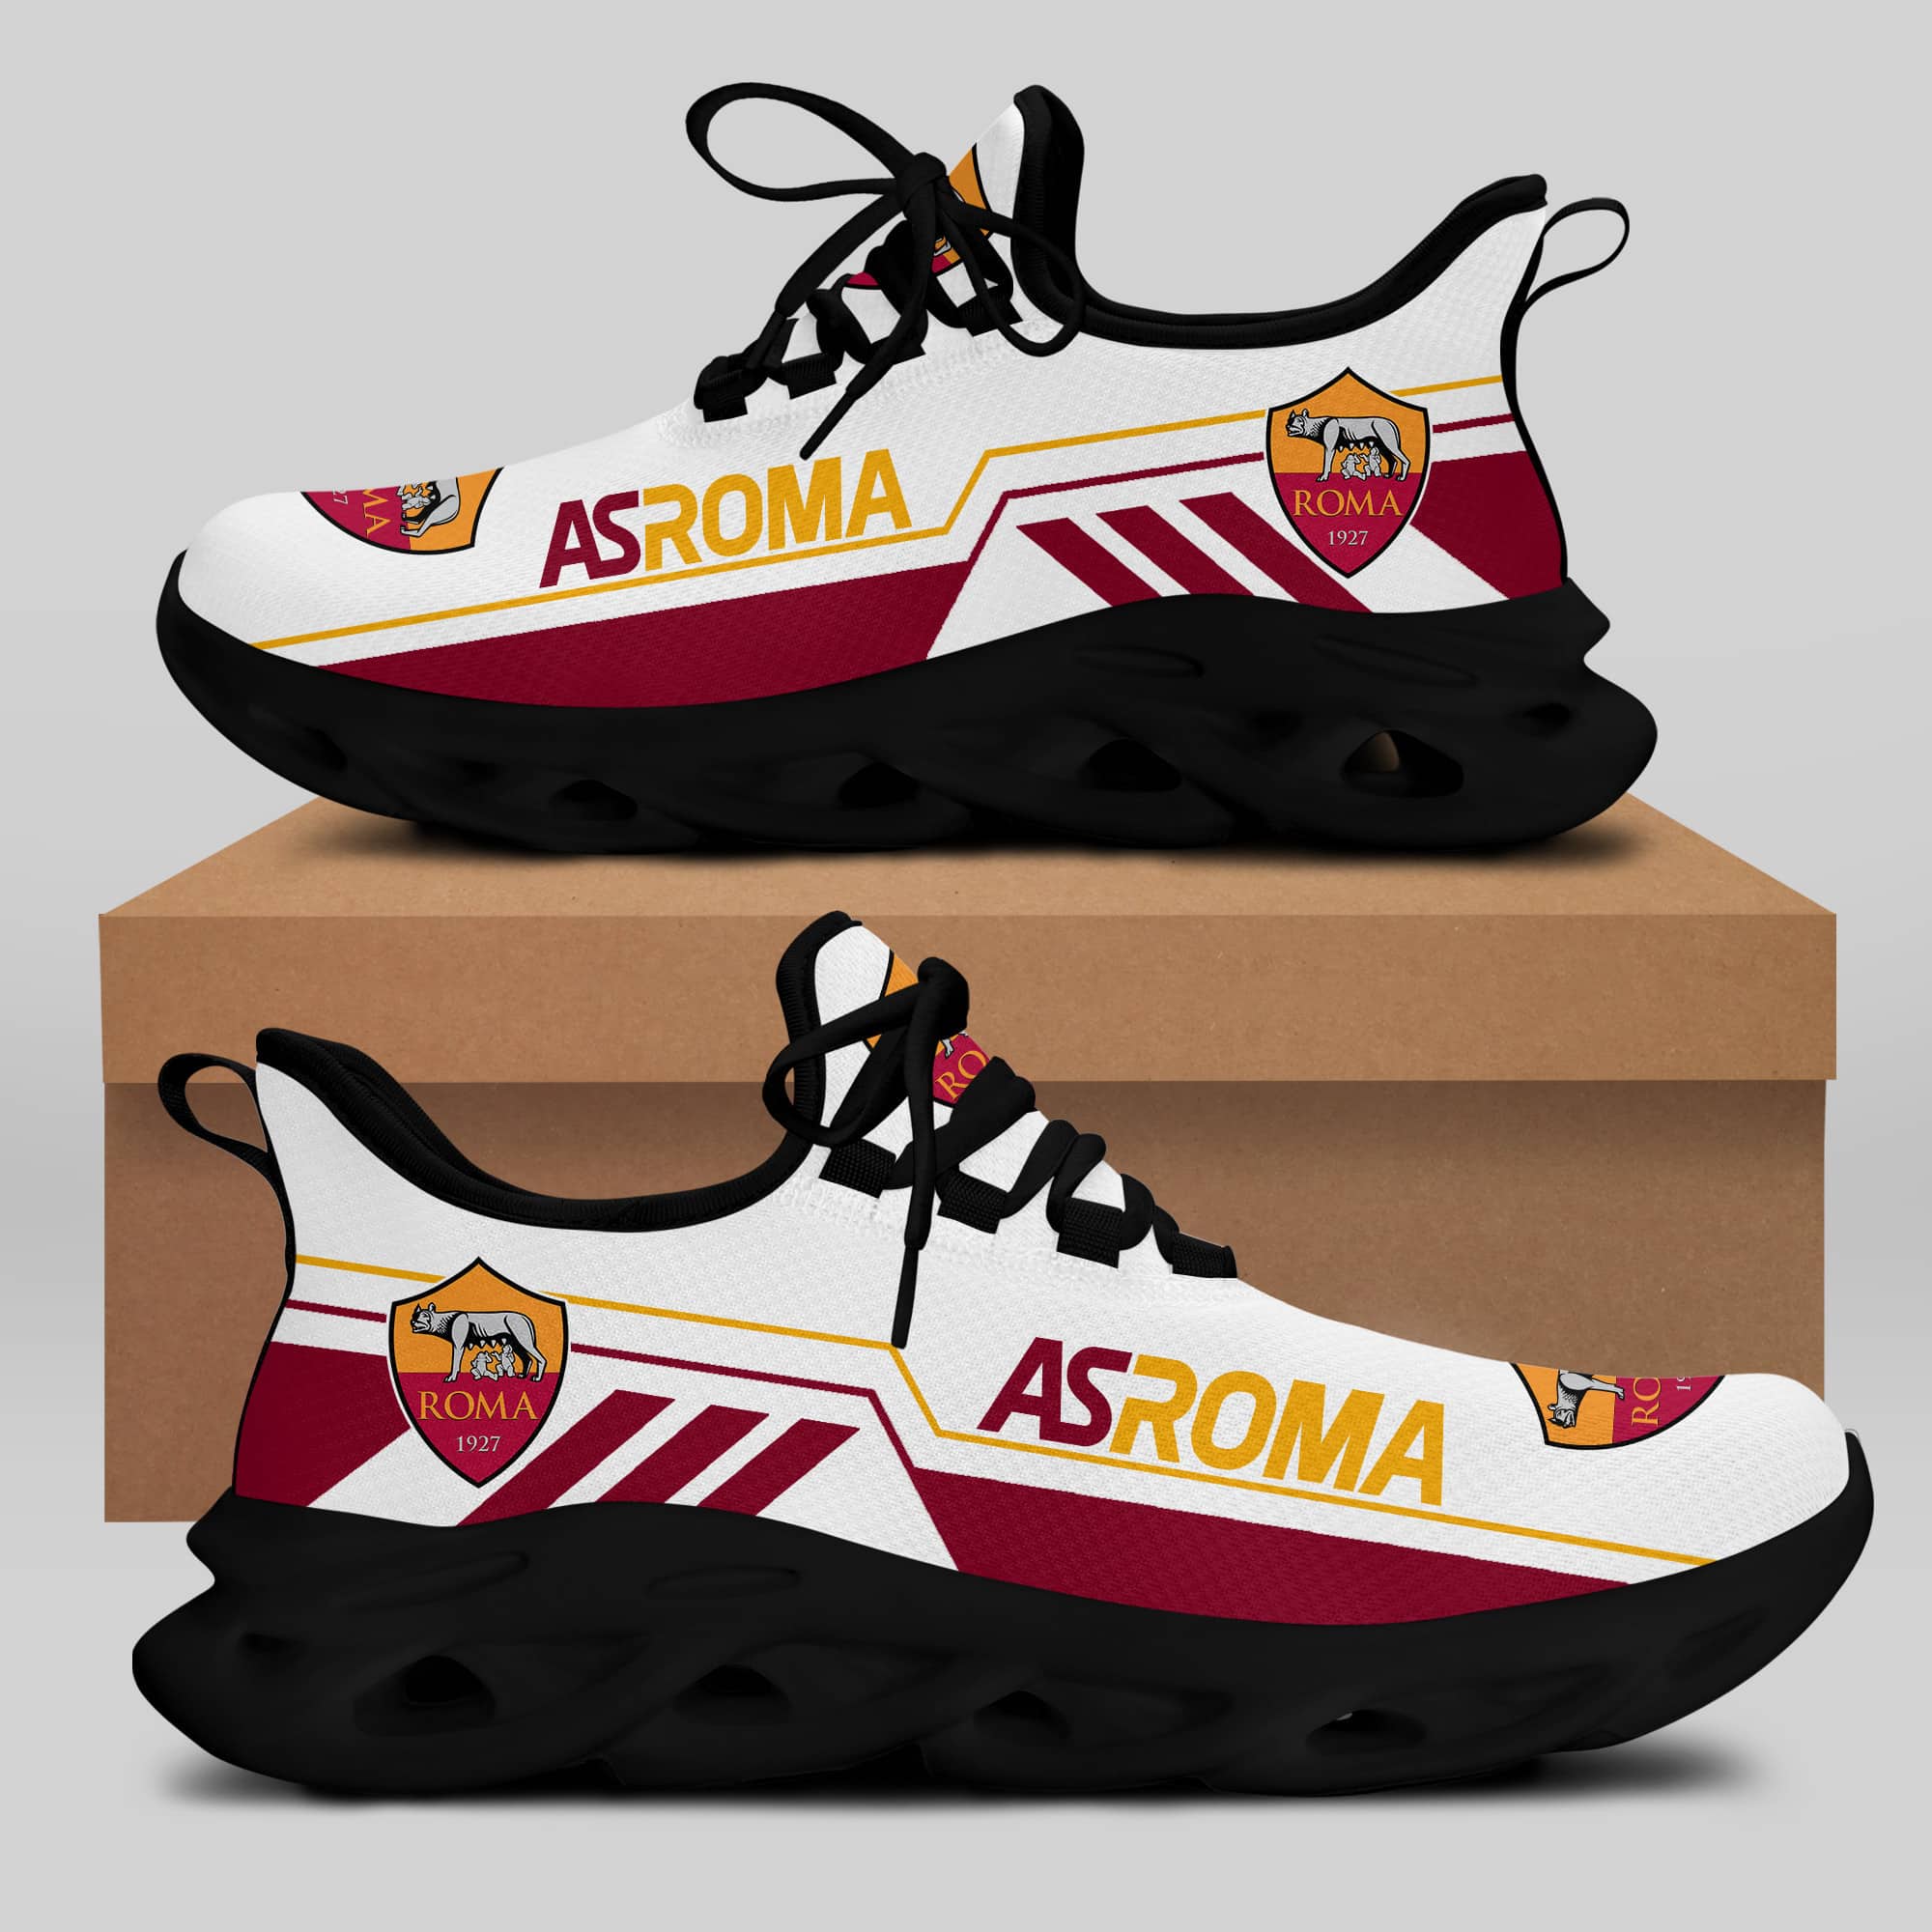 As Roma Running Shoes Max Soul Shoes Sneakers Ver 21 2